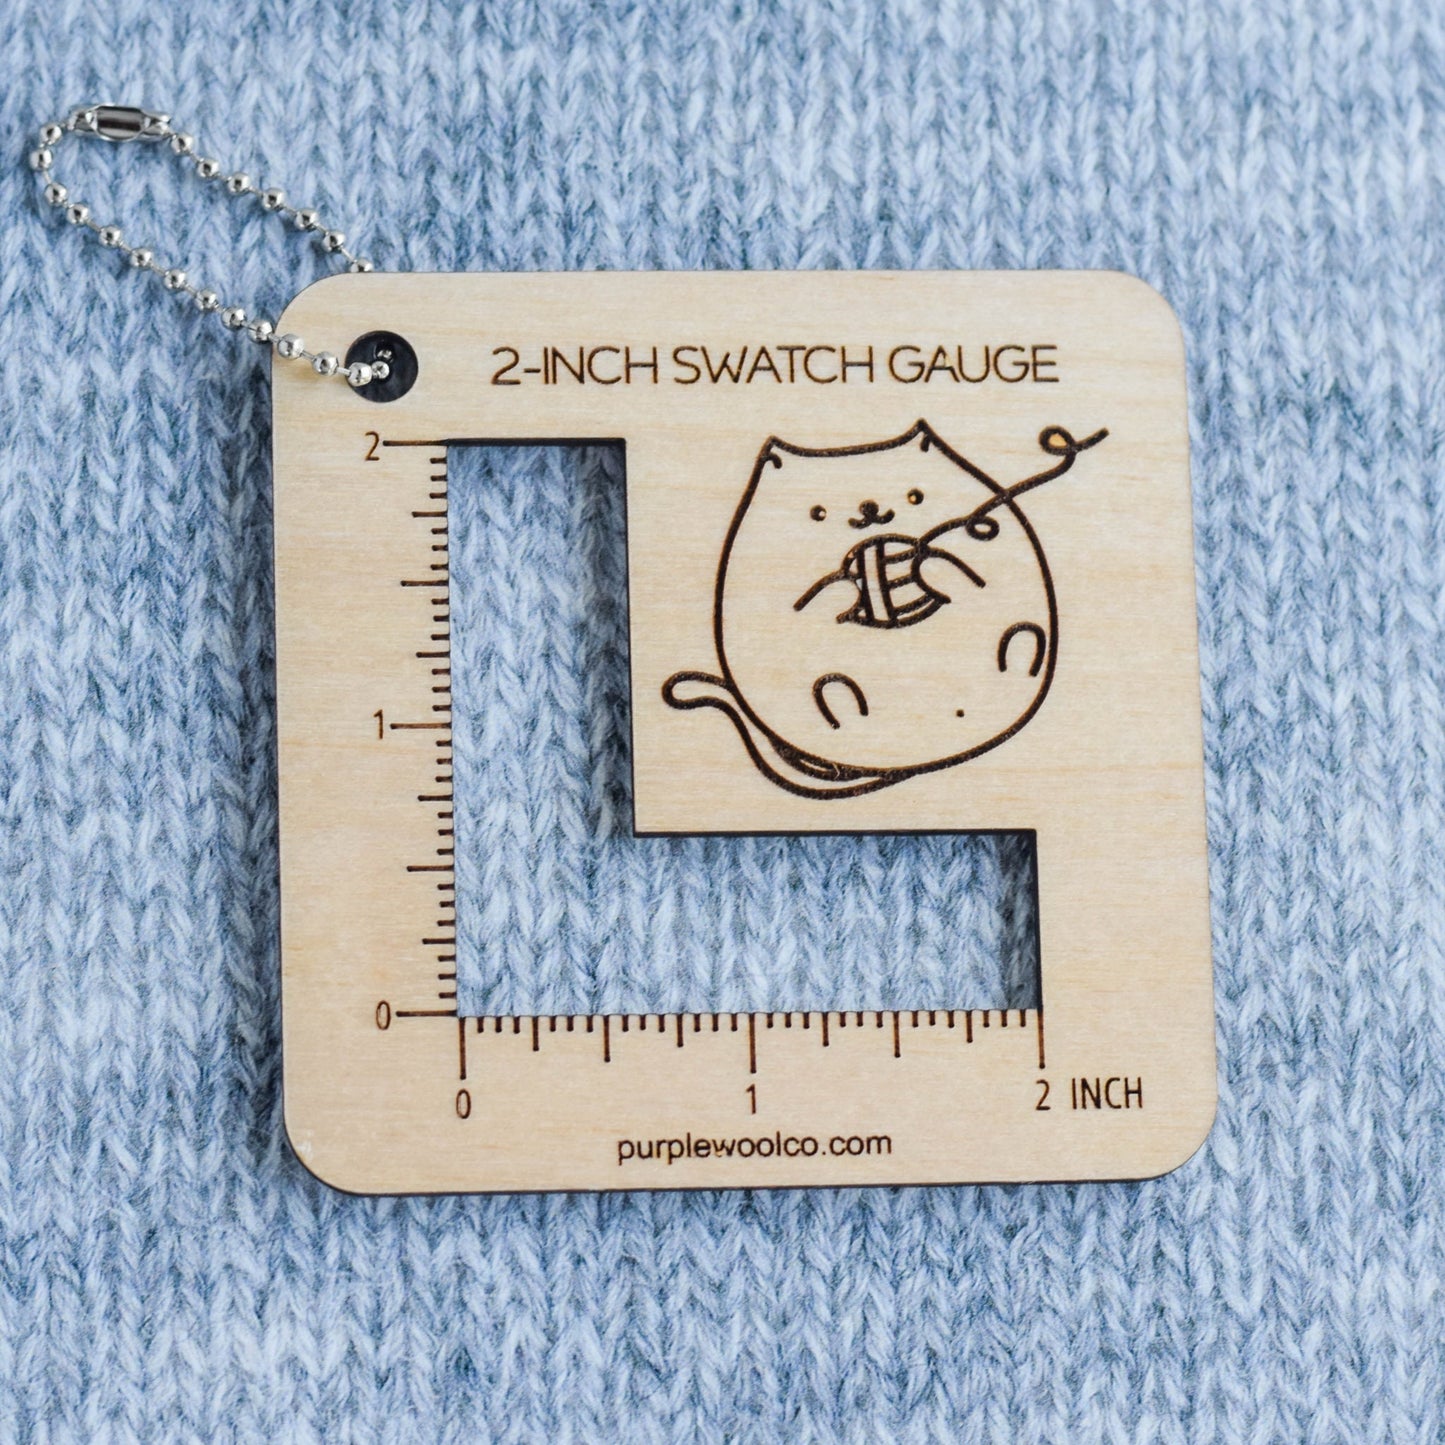 Knitting 2-inch Swatch Gauge - Cat - Wood Knitting Accessories, Knitting Tools, Gifts for Knitters, Eco-Friendly Knitting